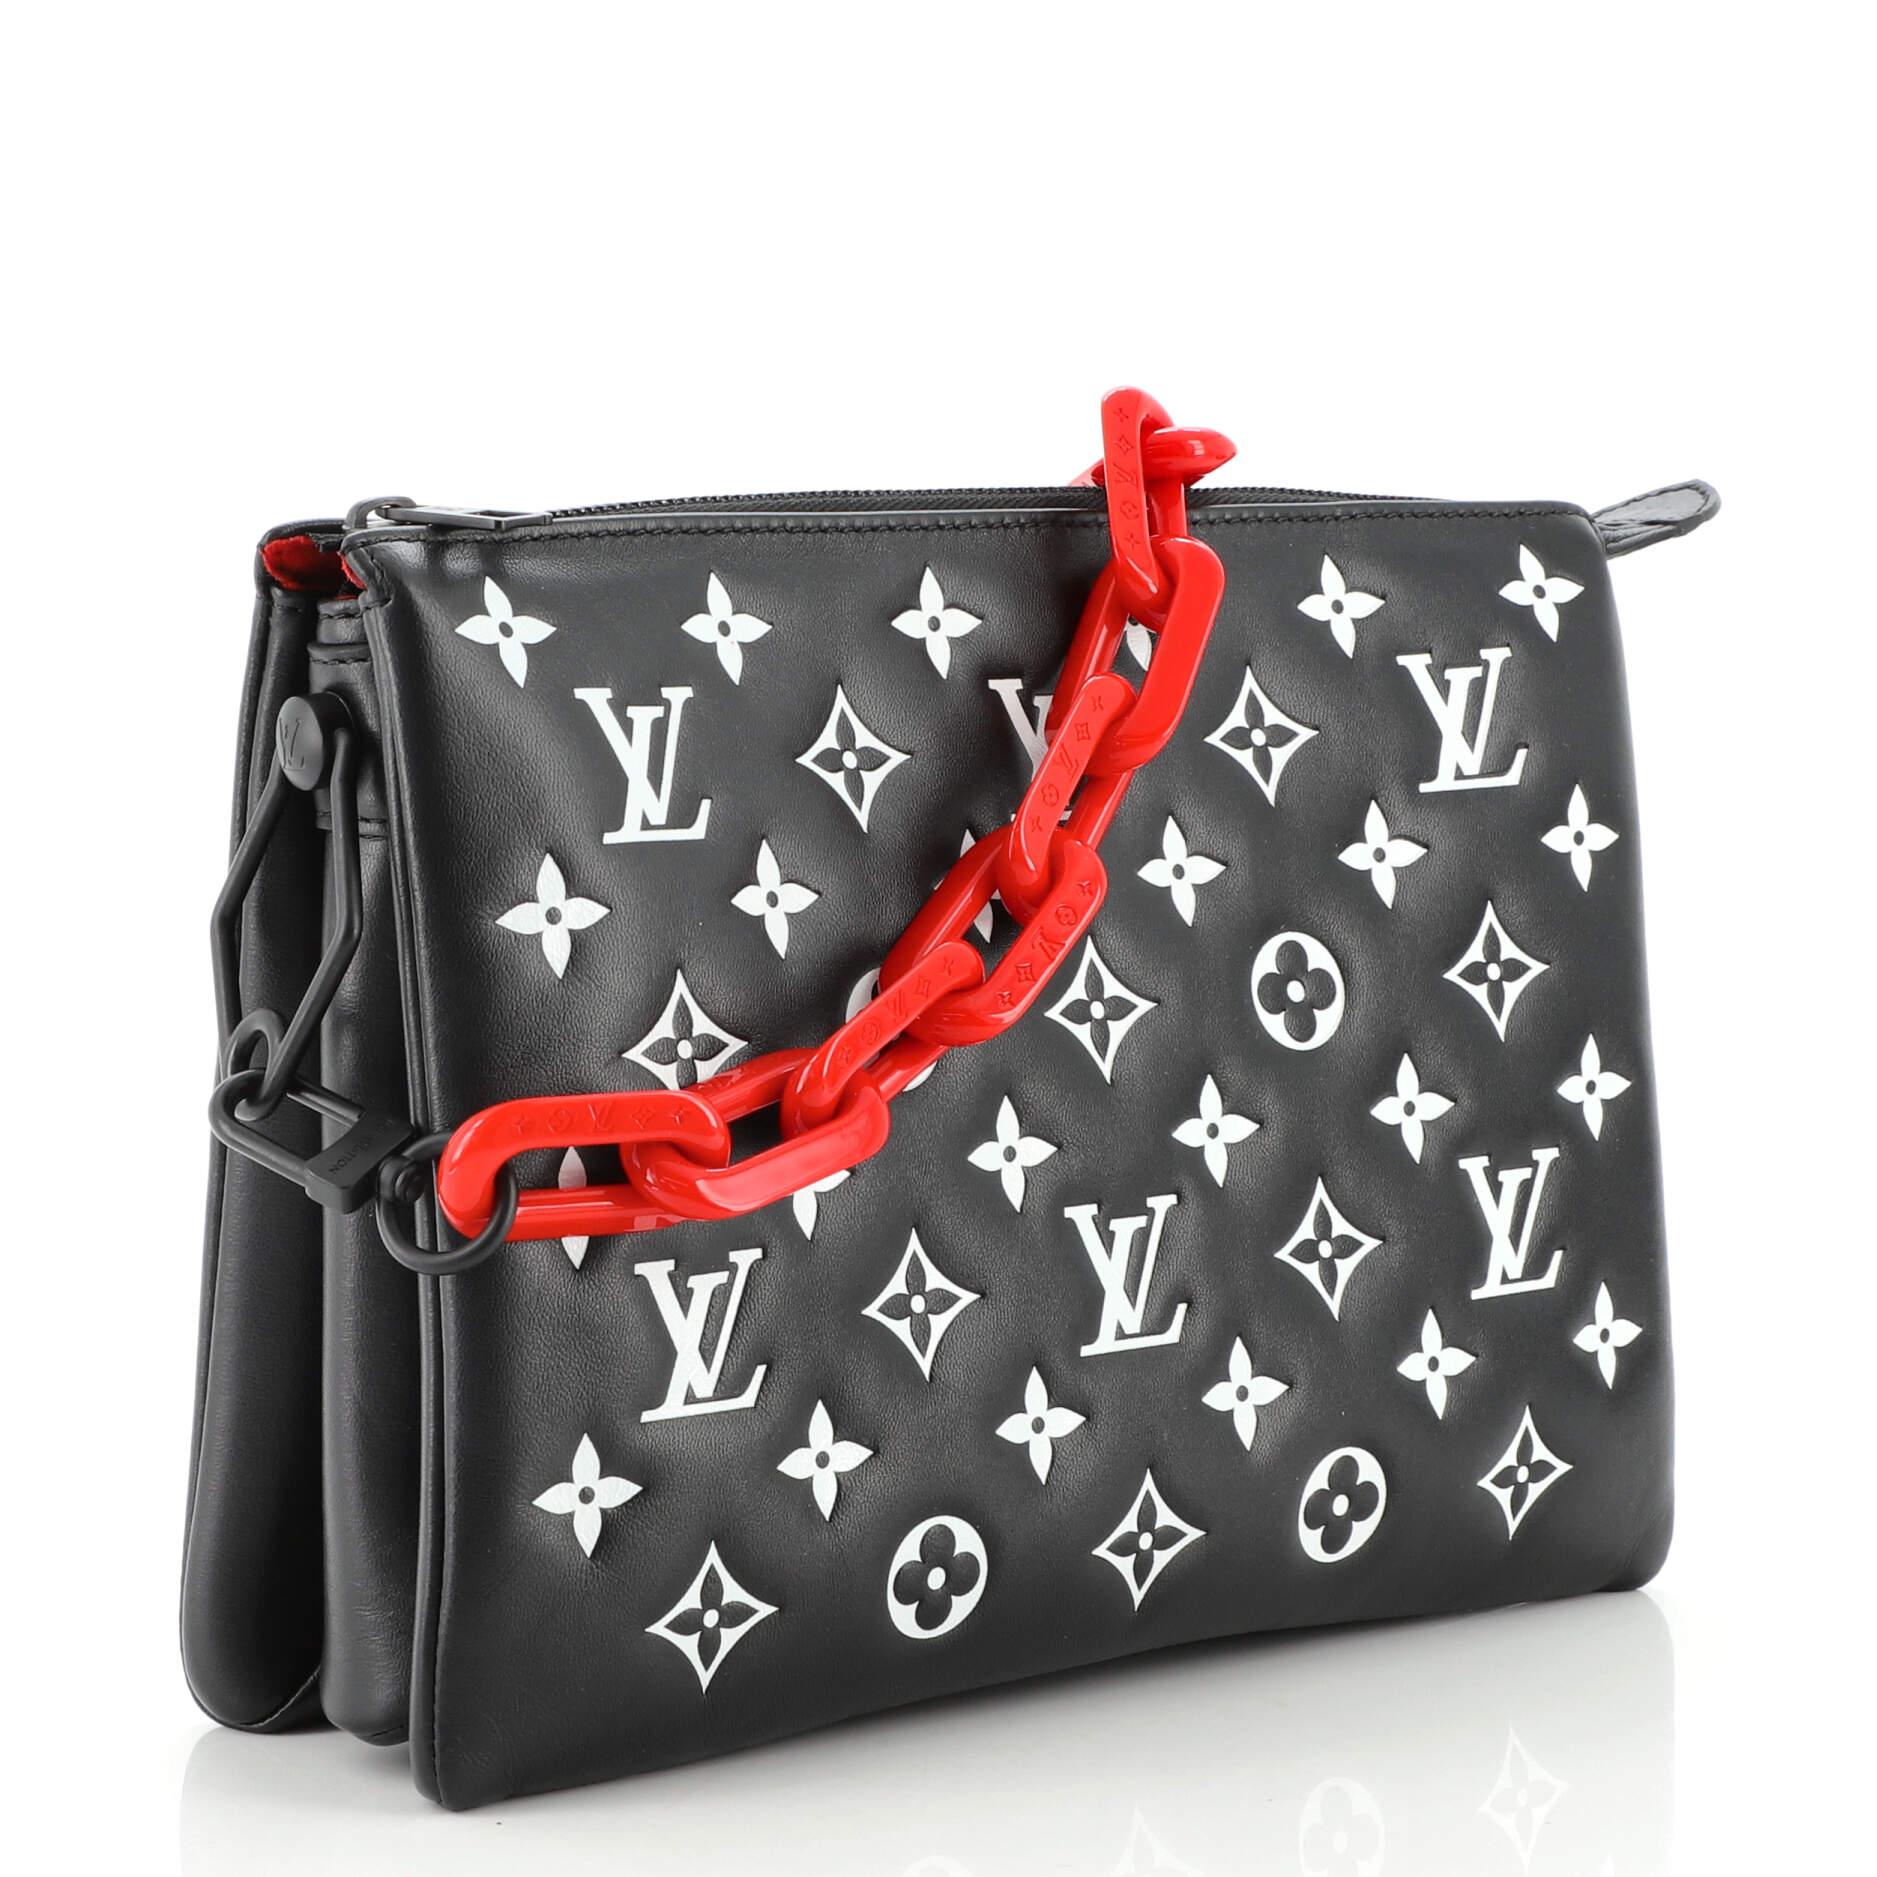 Louis Vuitton Coussin Pm Black - 2 For Sale on 1stDibs